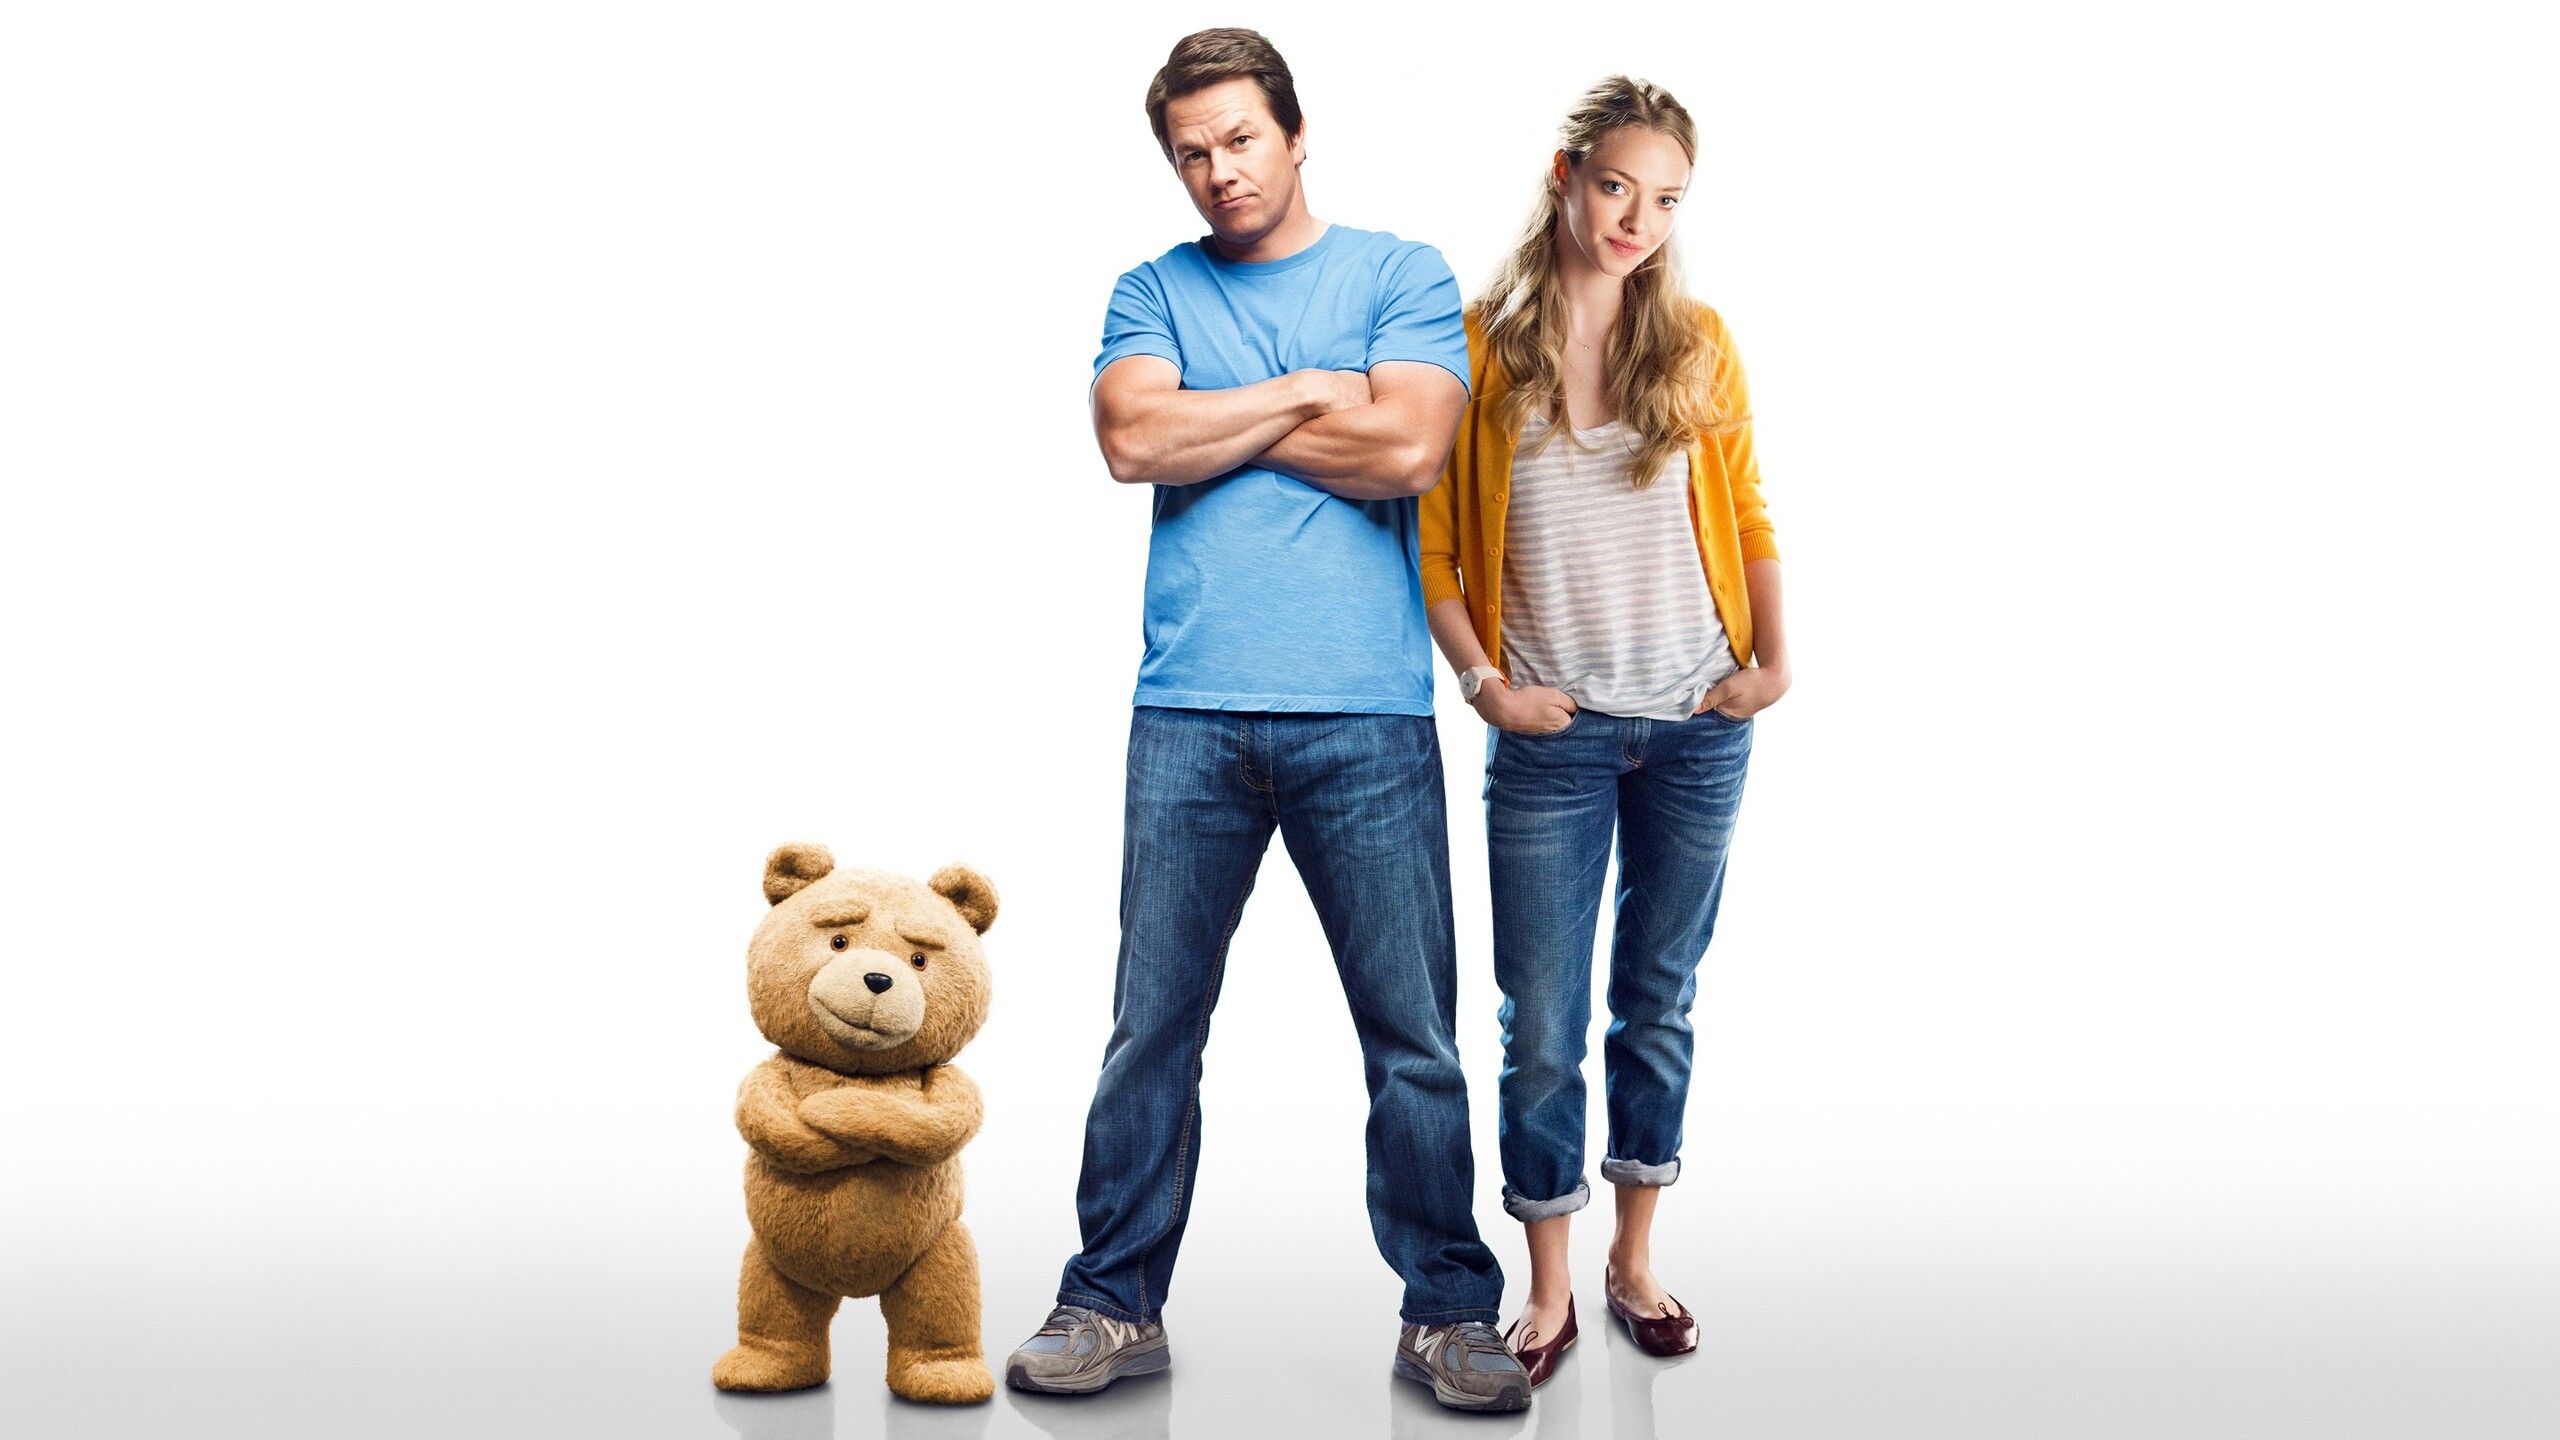 Ted 2 Movie 1440P Resolution HD 4k Wallpaper, Image, Background, Photo and Picture